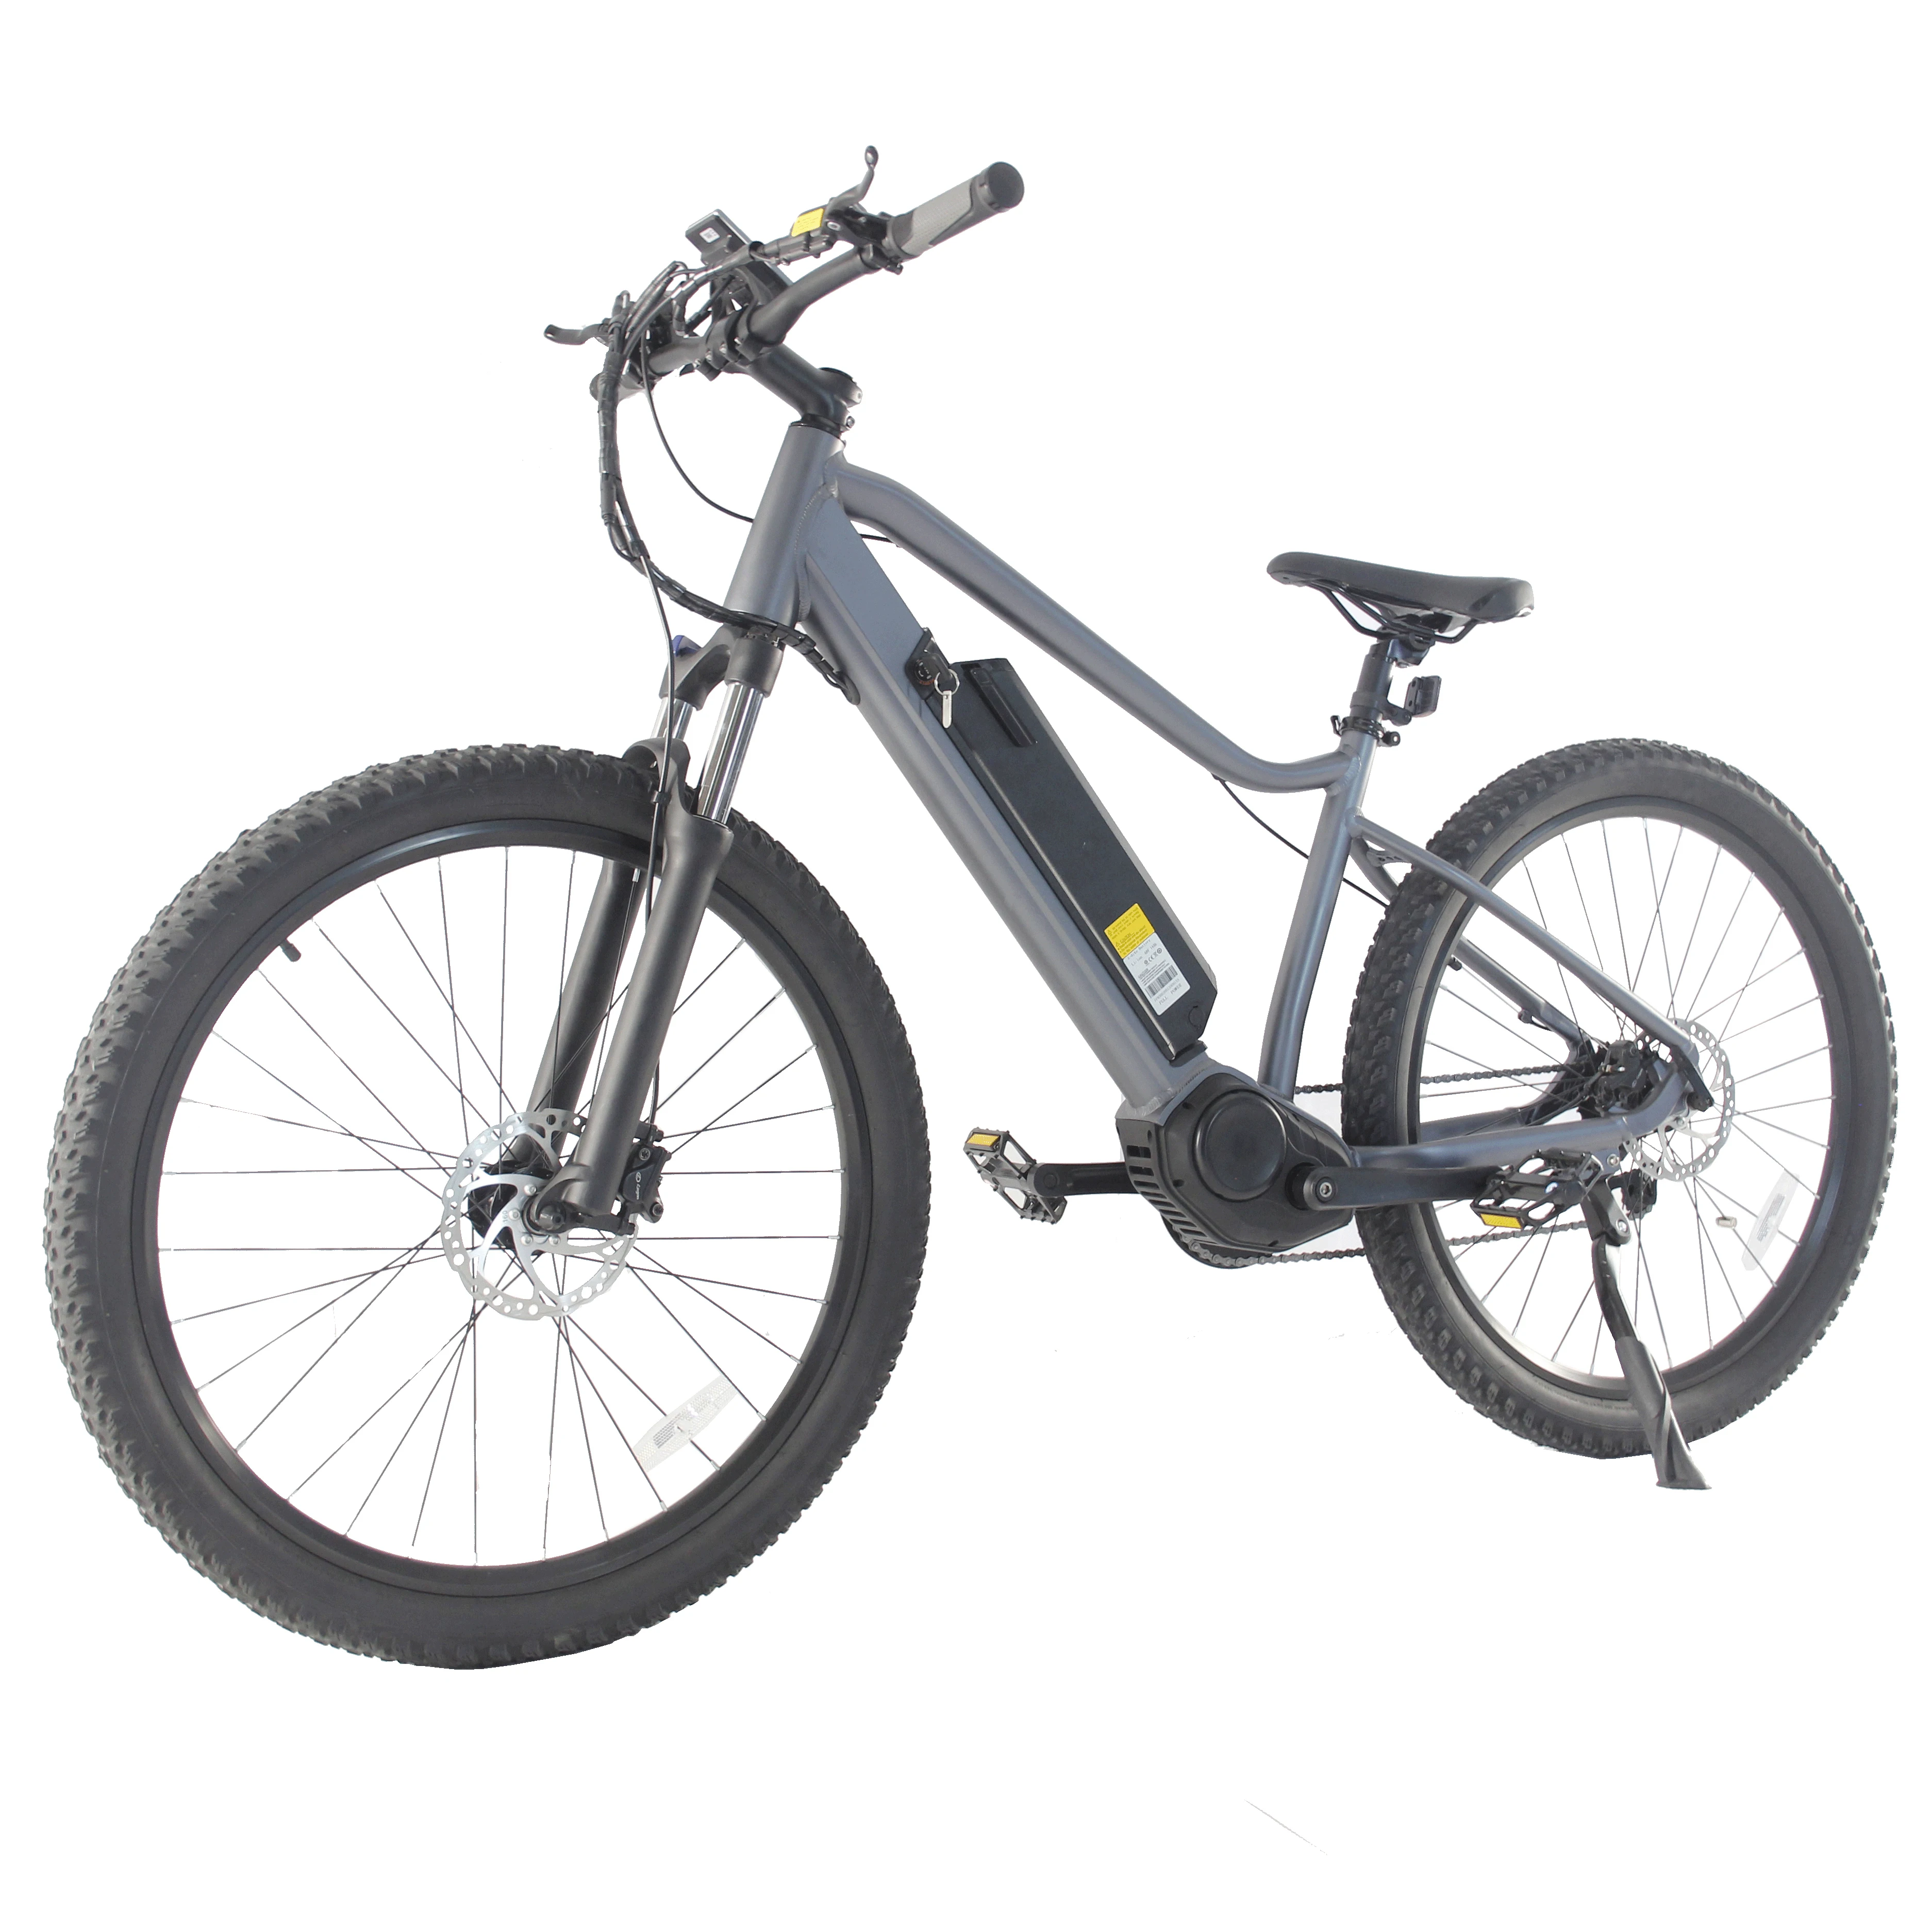 

Suspension fork 27.5 inch 500W 750W mid drive ebike 7-9 speed with hydraulic brake